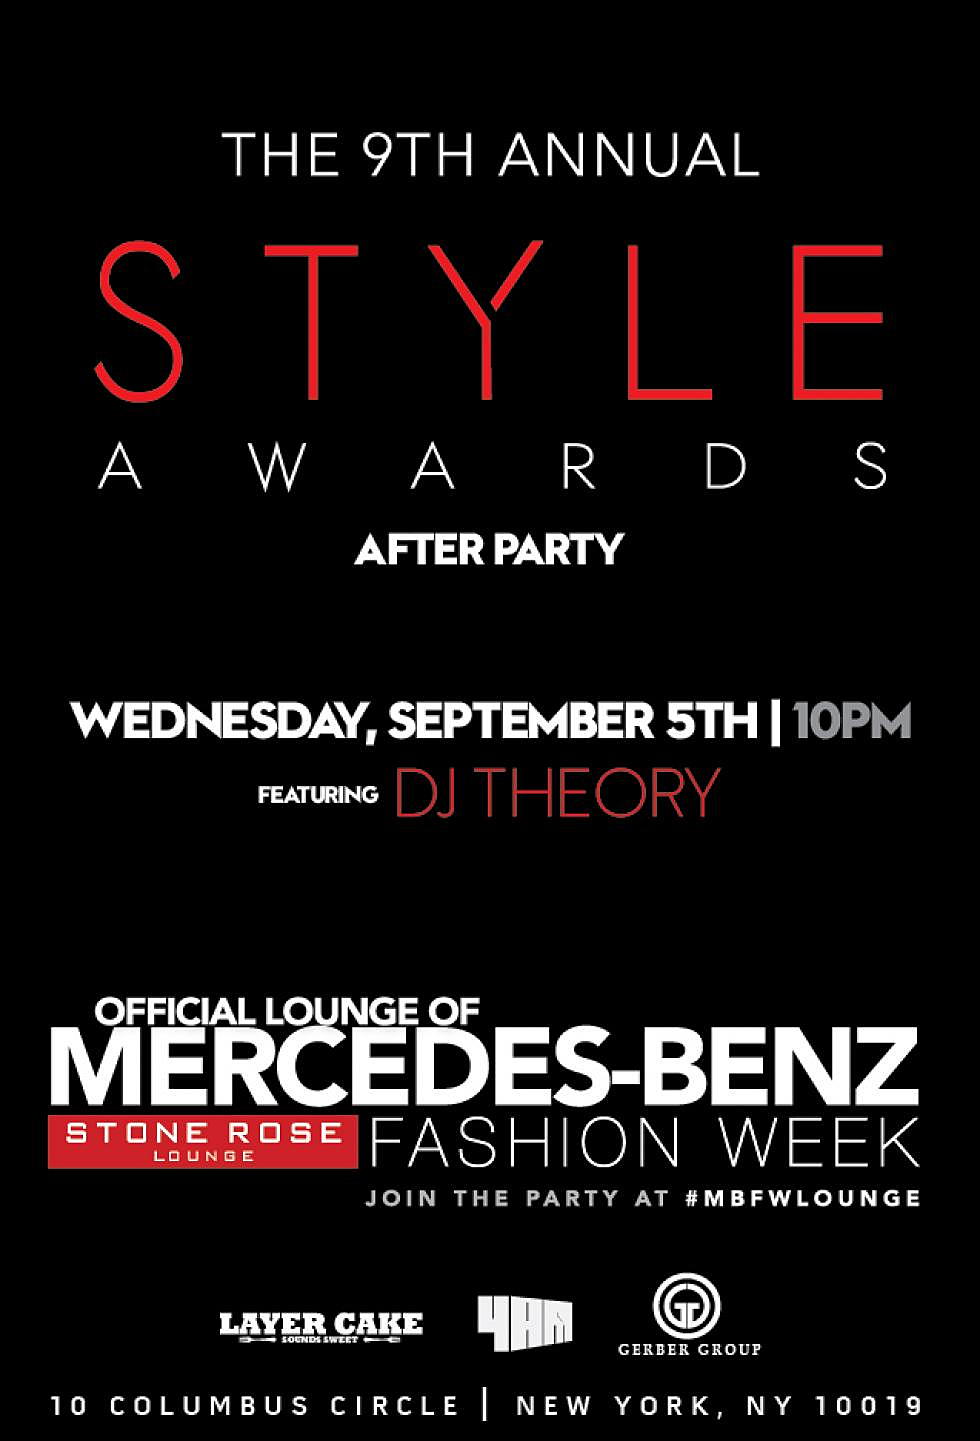 Mercedes-Benz Fashion Week: The 9th Annual Style Awards After Party w/ DJ Theory + Interview